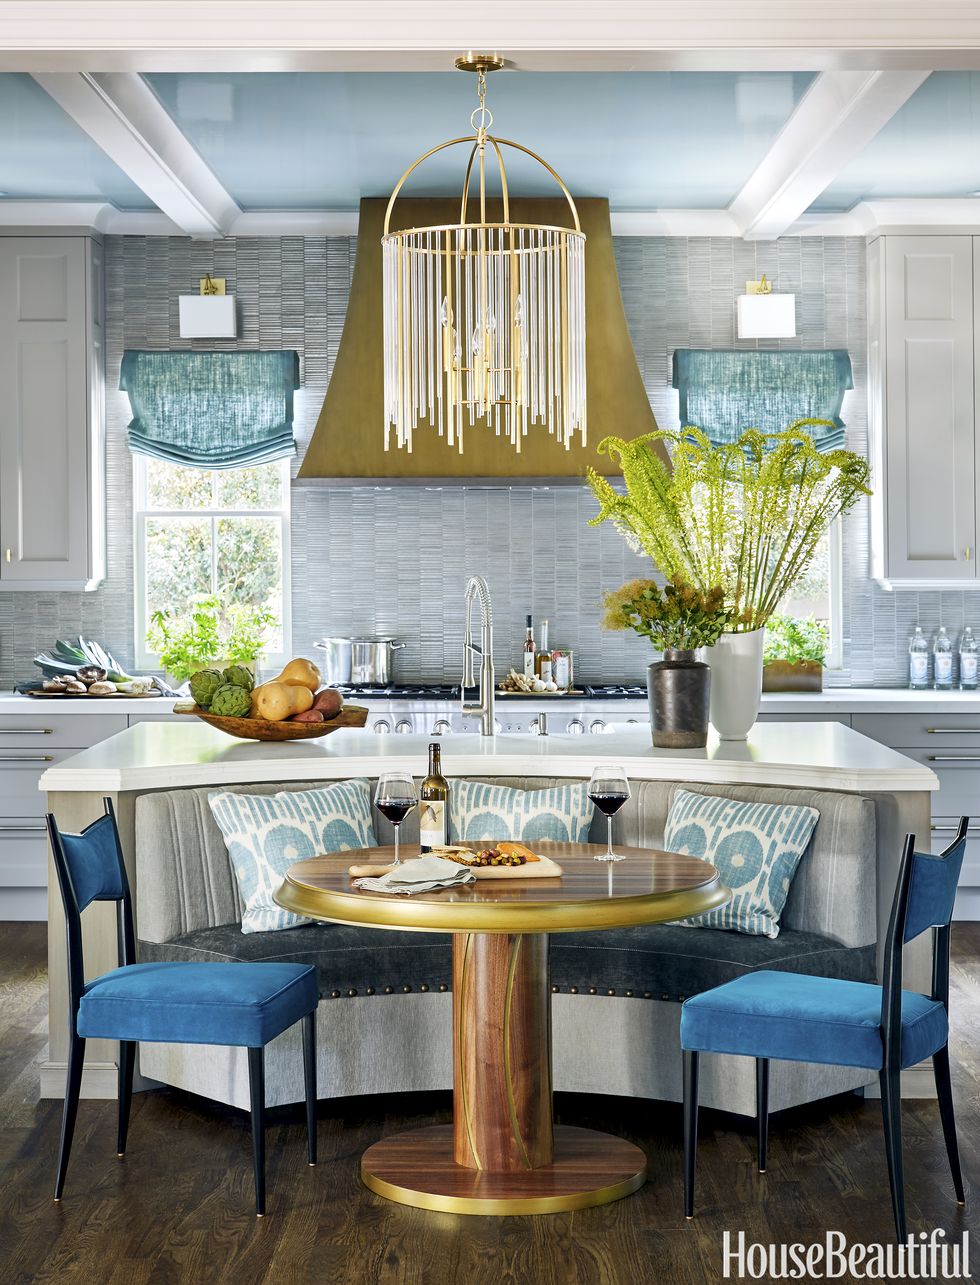 kitchen of the year banquette